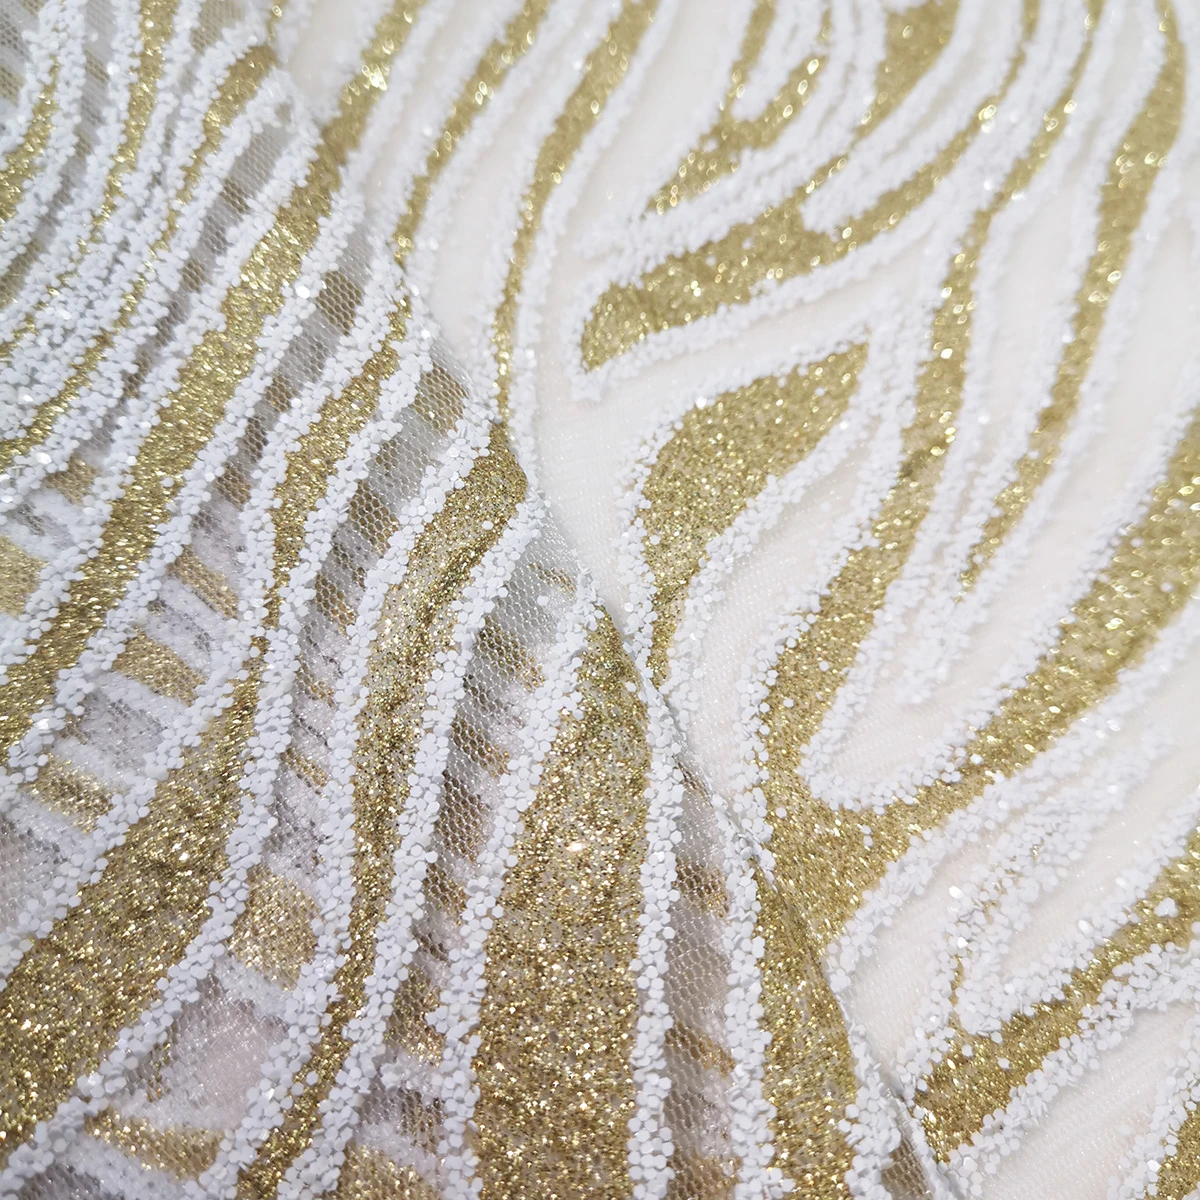 High Quality African White Glitter Bridal Dress Lace Fabric New Arrival Gold Sequin Net Tulle Wedding Clothes Women In Polyester